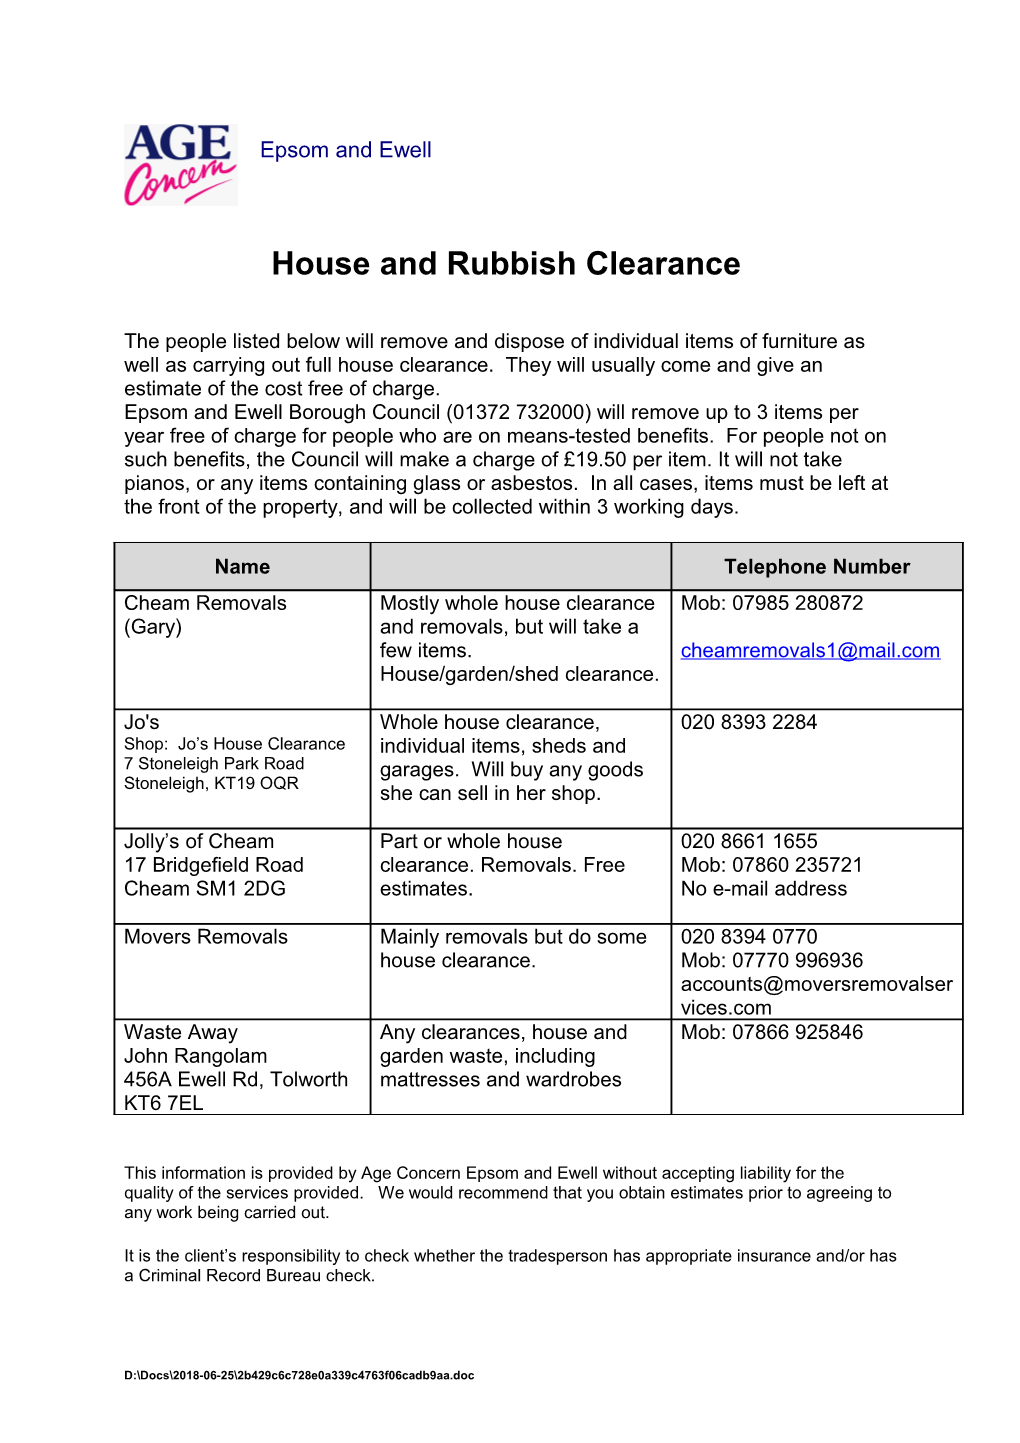 House and Rubbish Clearance